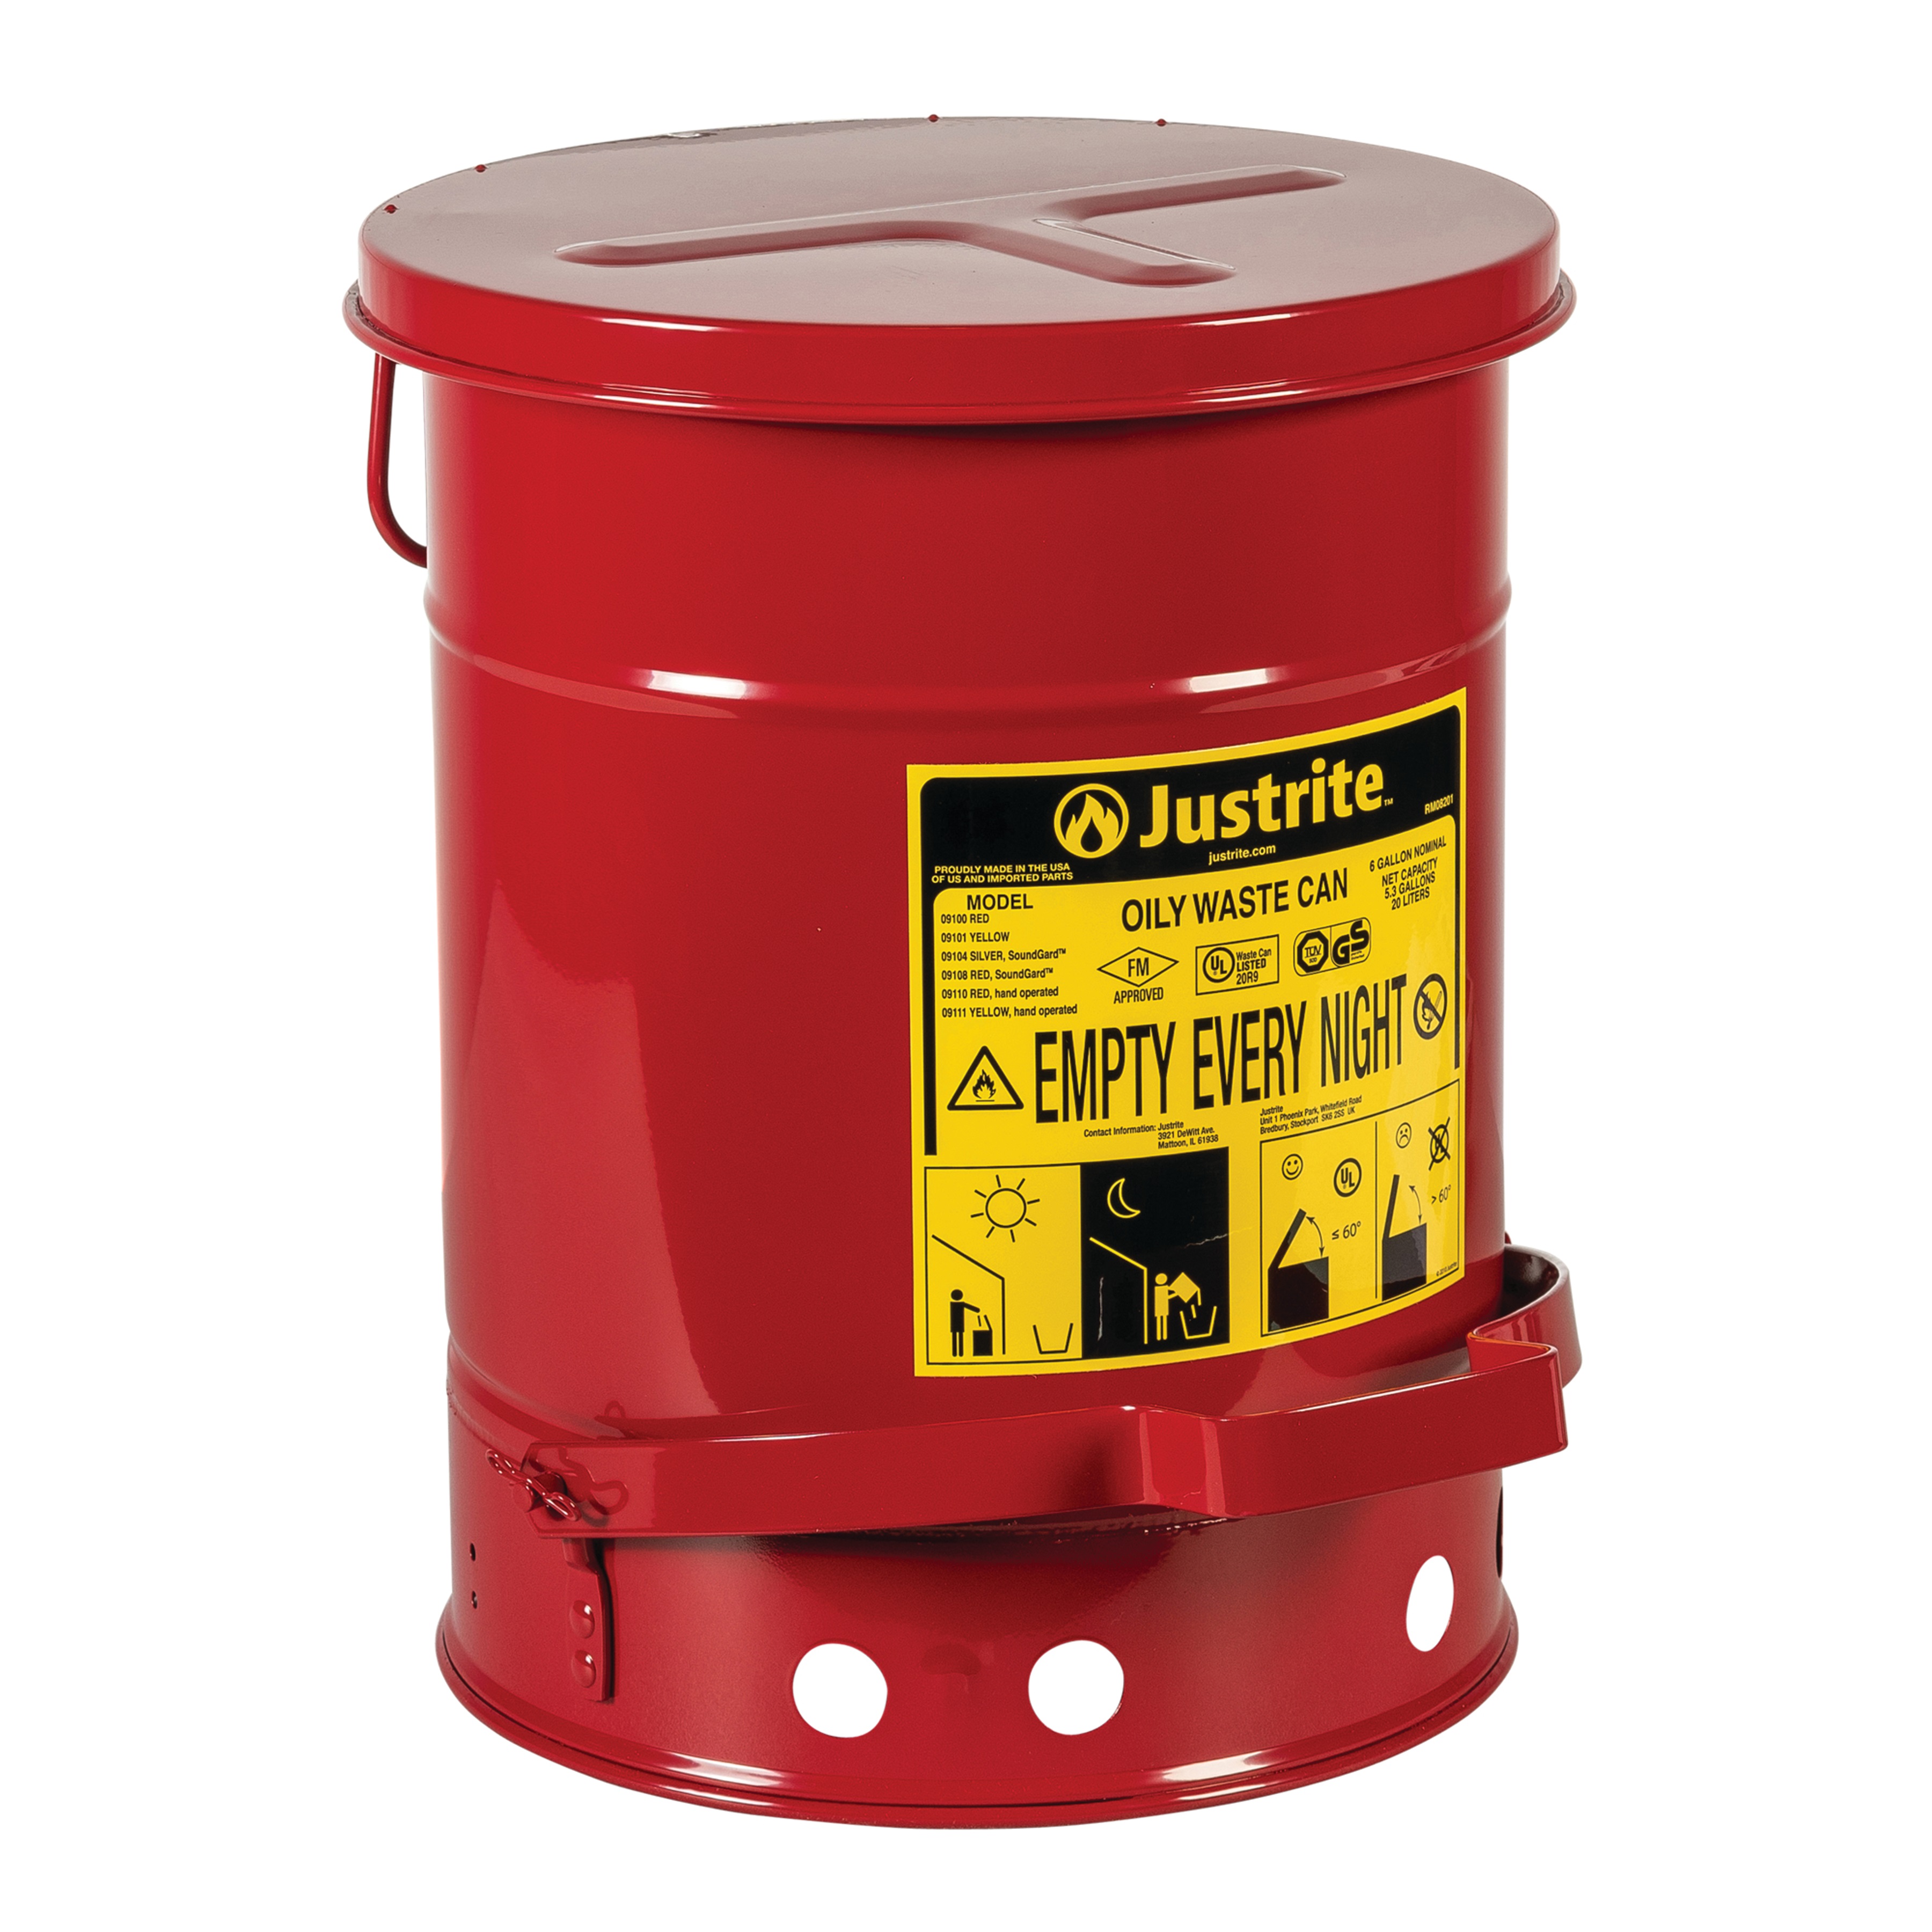 Justrite Oily Waste Cans - Red - Foot Operated - Spill Containment